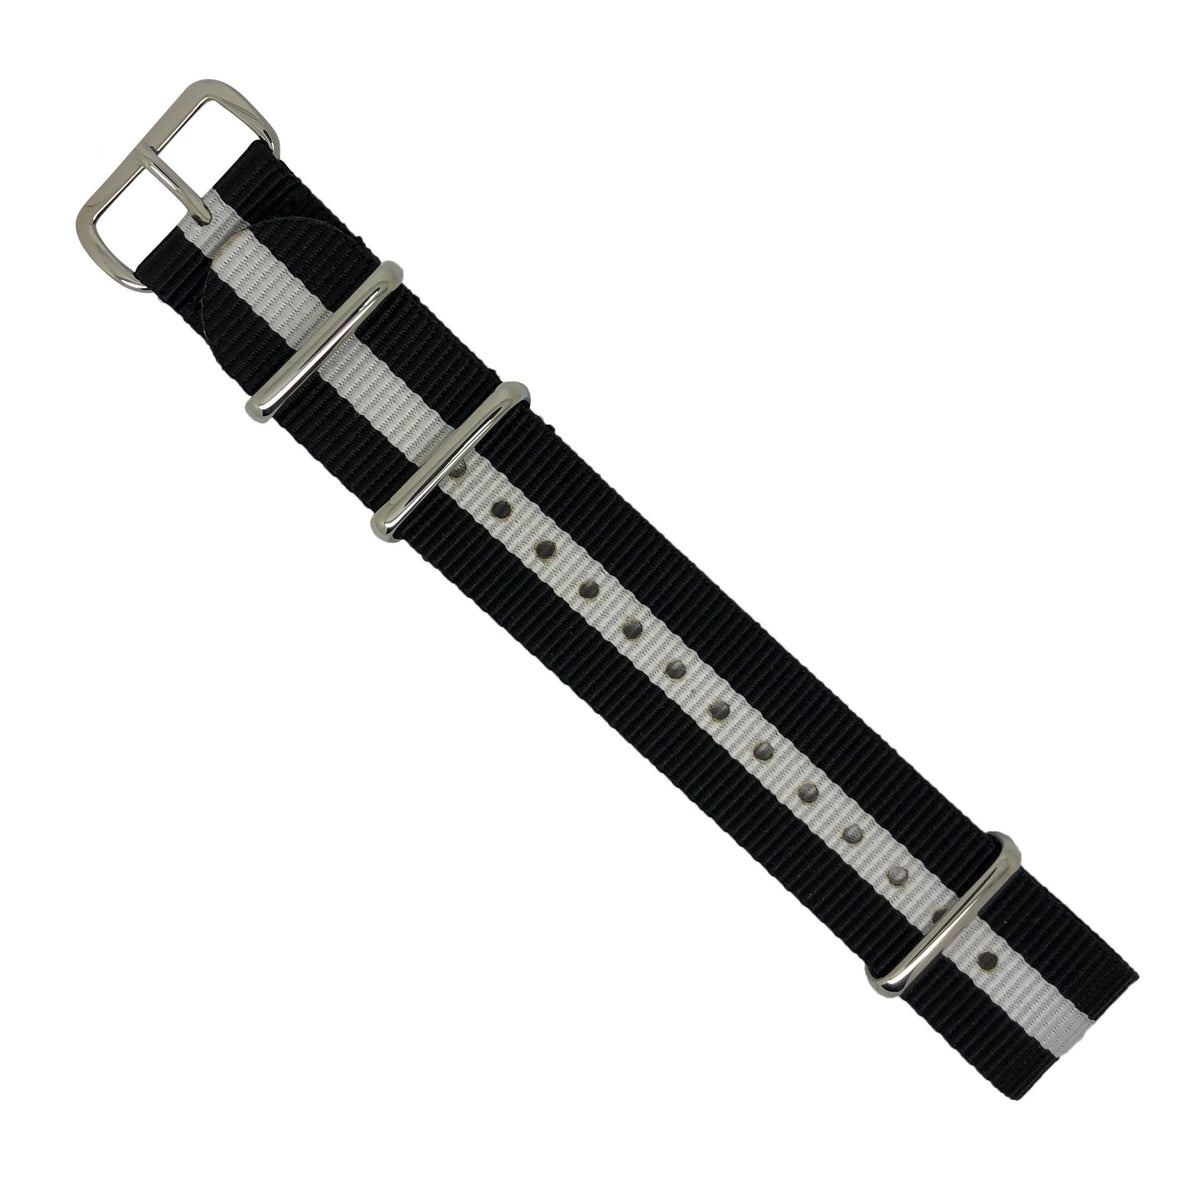 Premium Nato Strap in Black White with Polished Silver Buckle (20mm) - Nomad Watch Works Malaysia